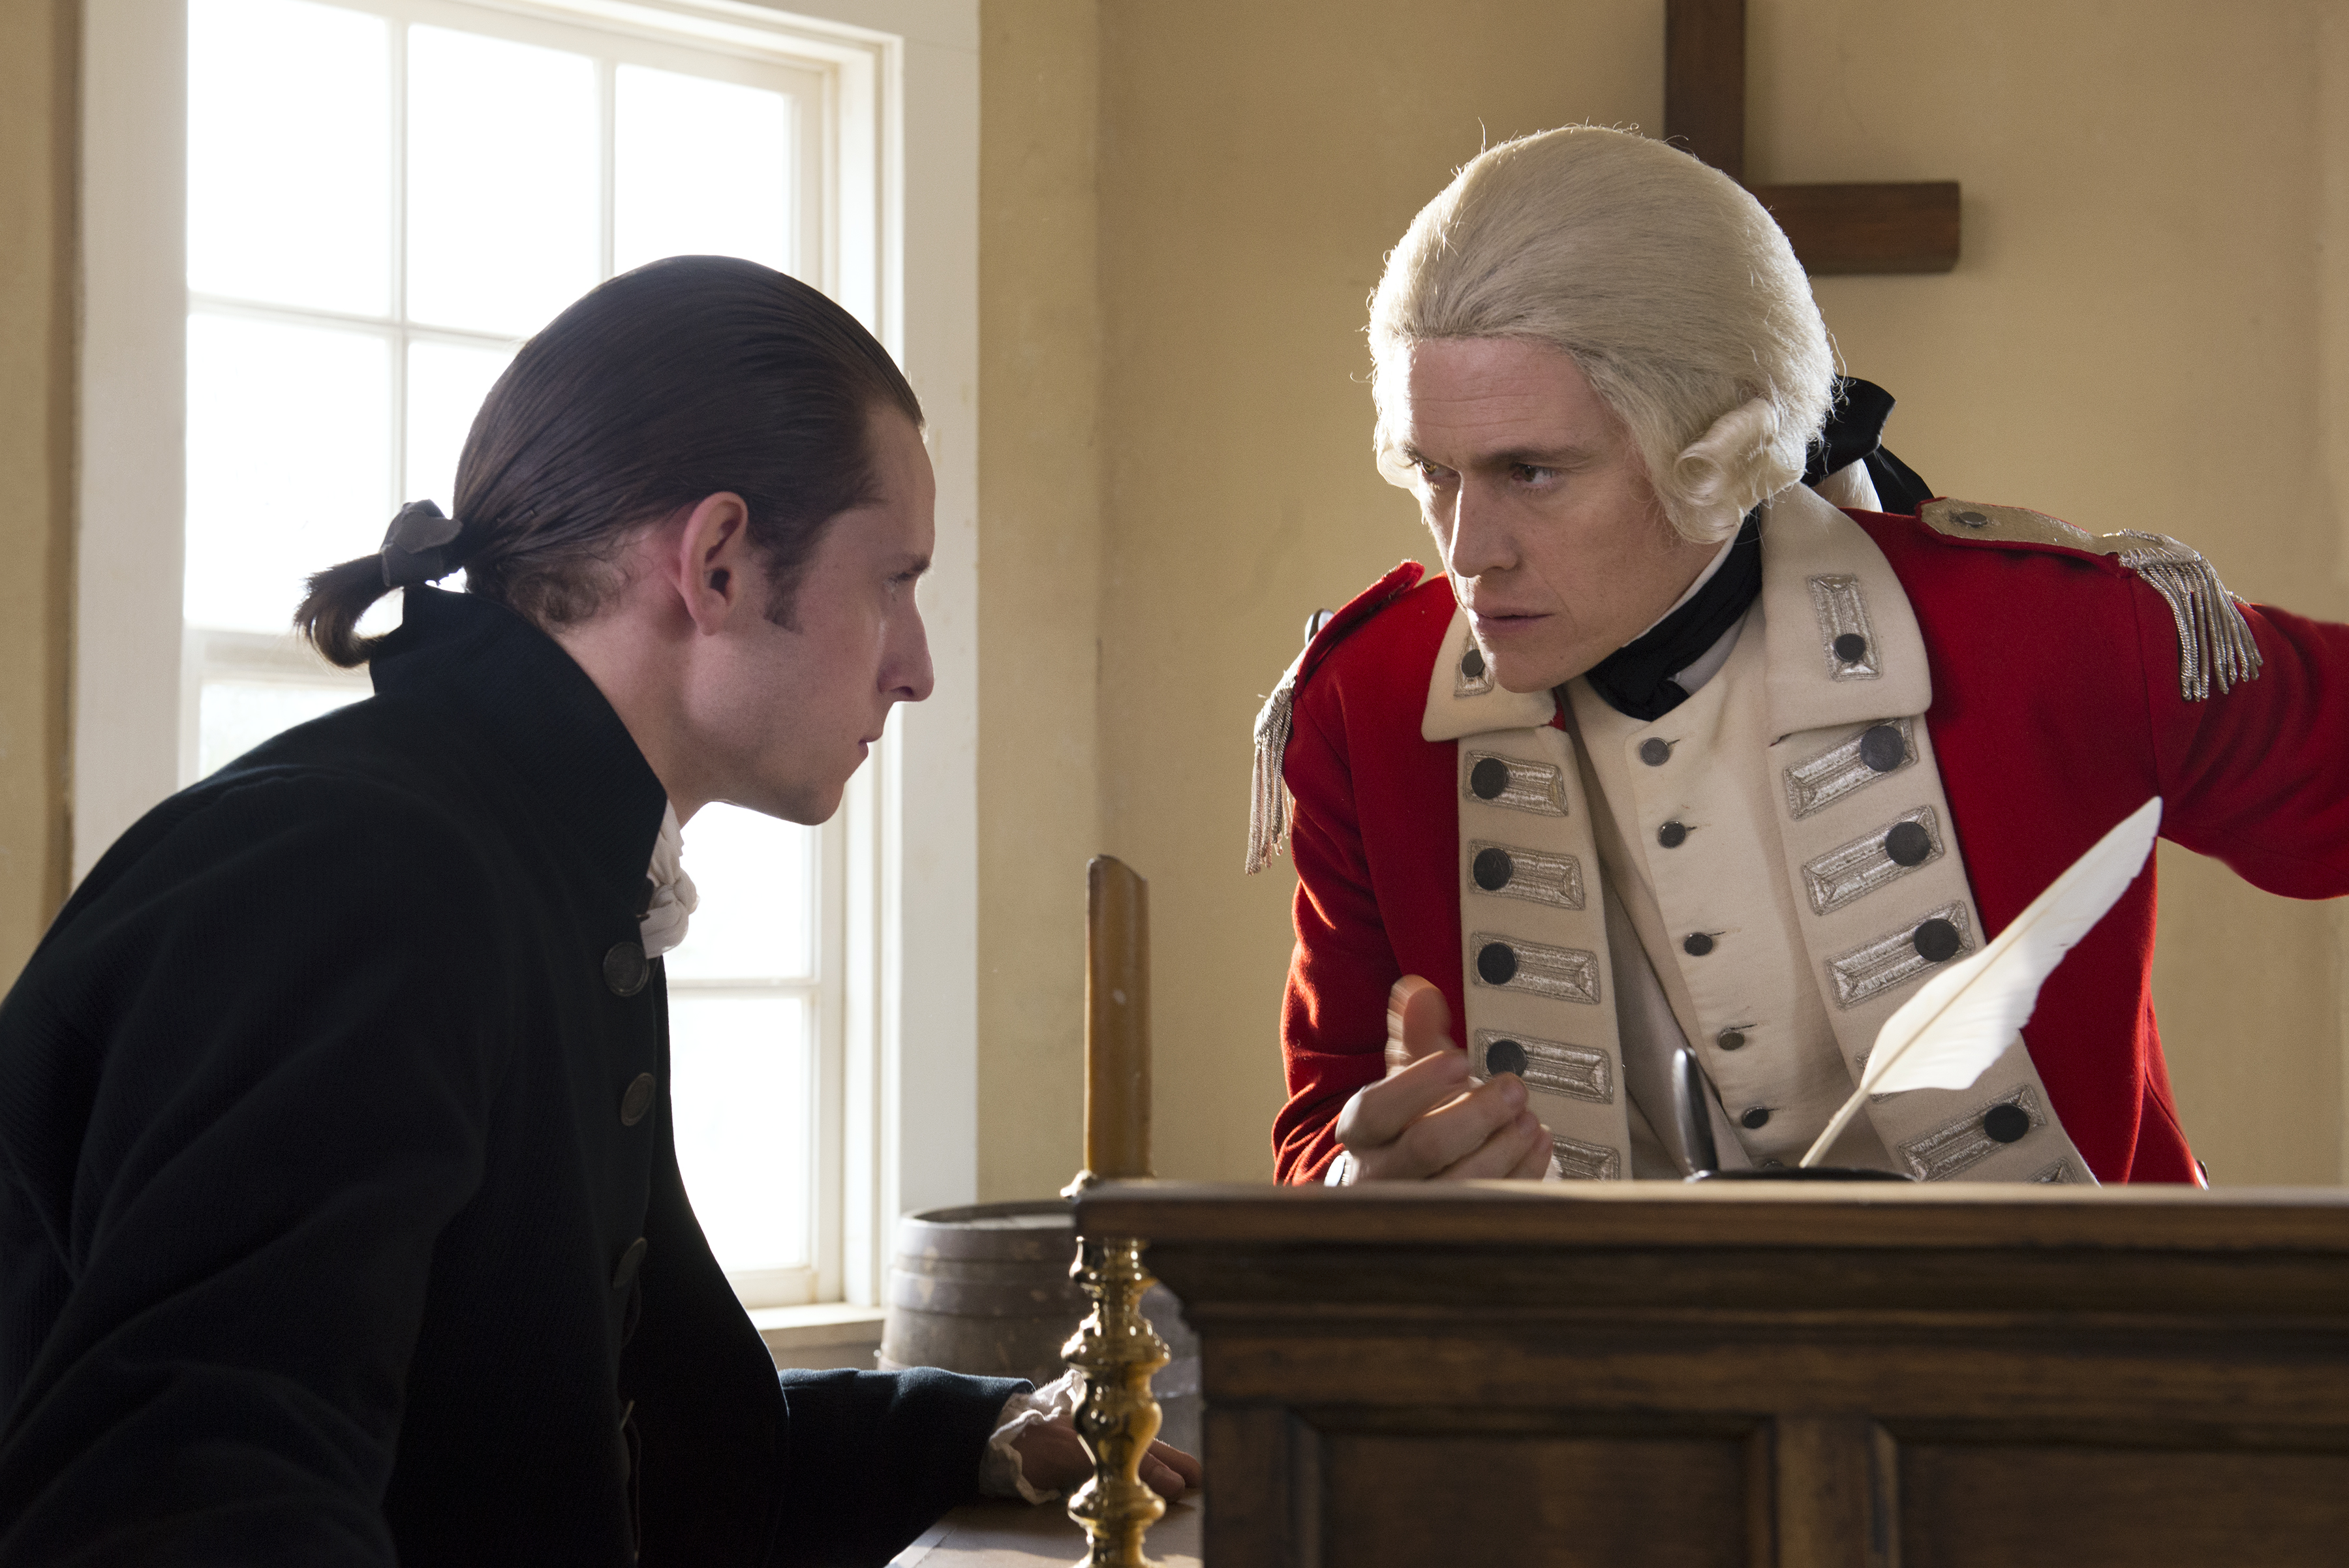 Abraham Woodhull confers with Major Hewlitt during the Court Hearings on TURN. As played by Jamie Bell & Burn Gorman